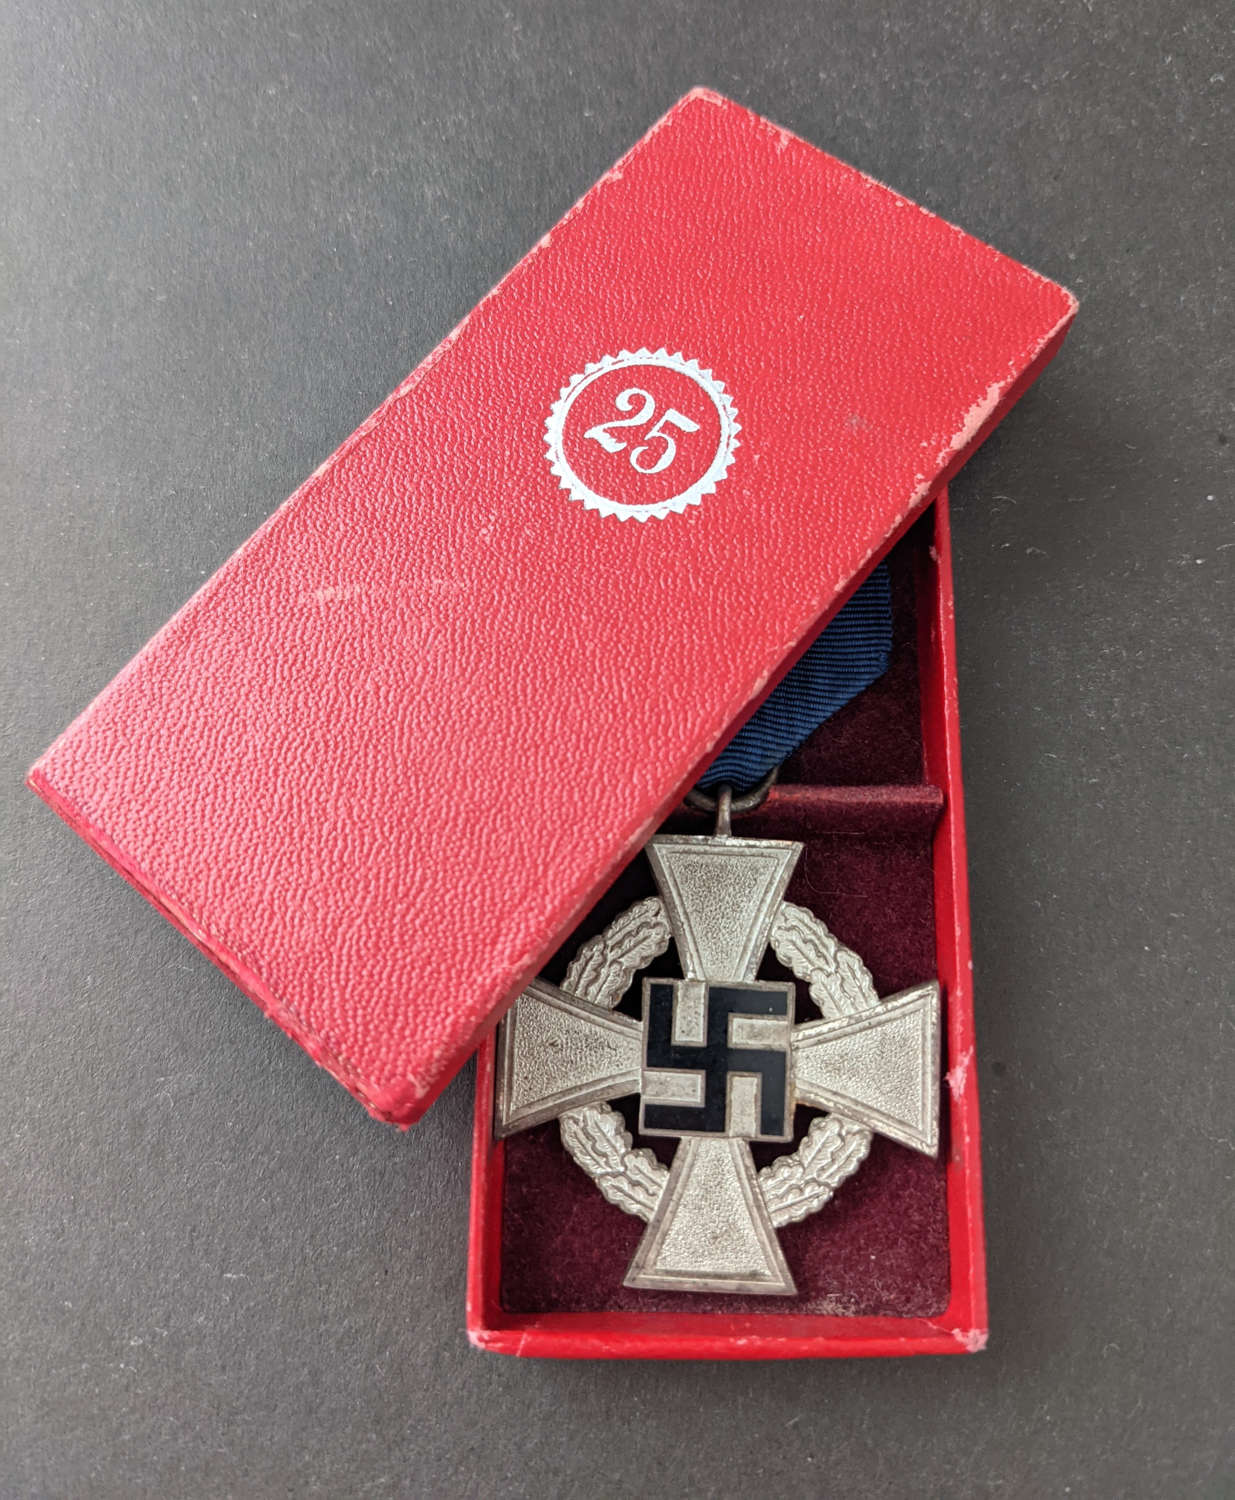 Boxed German 25 years Service Medal